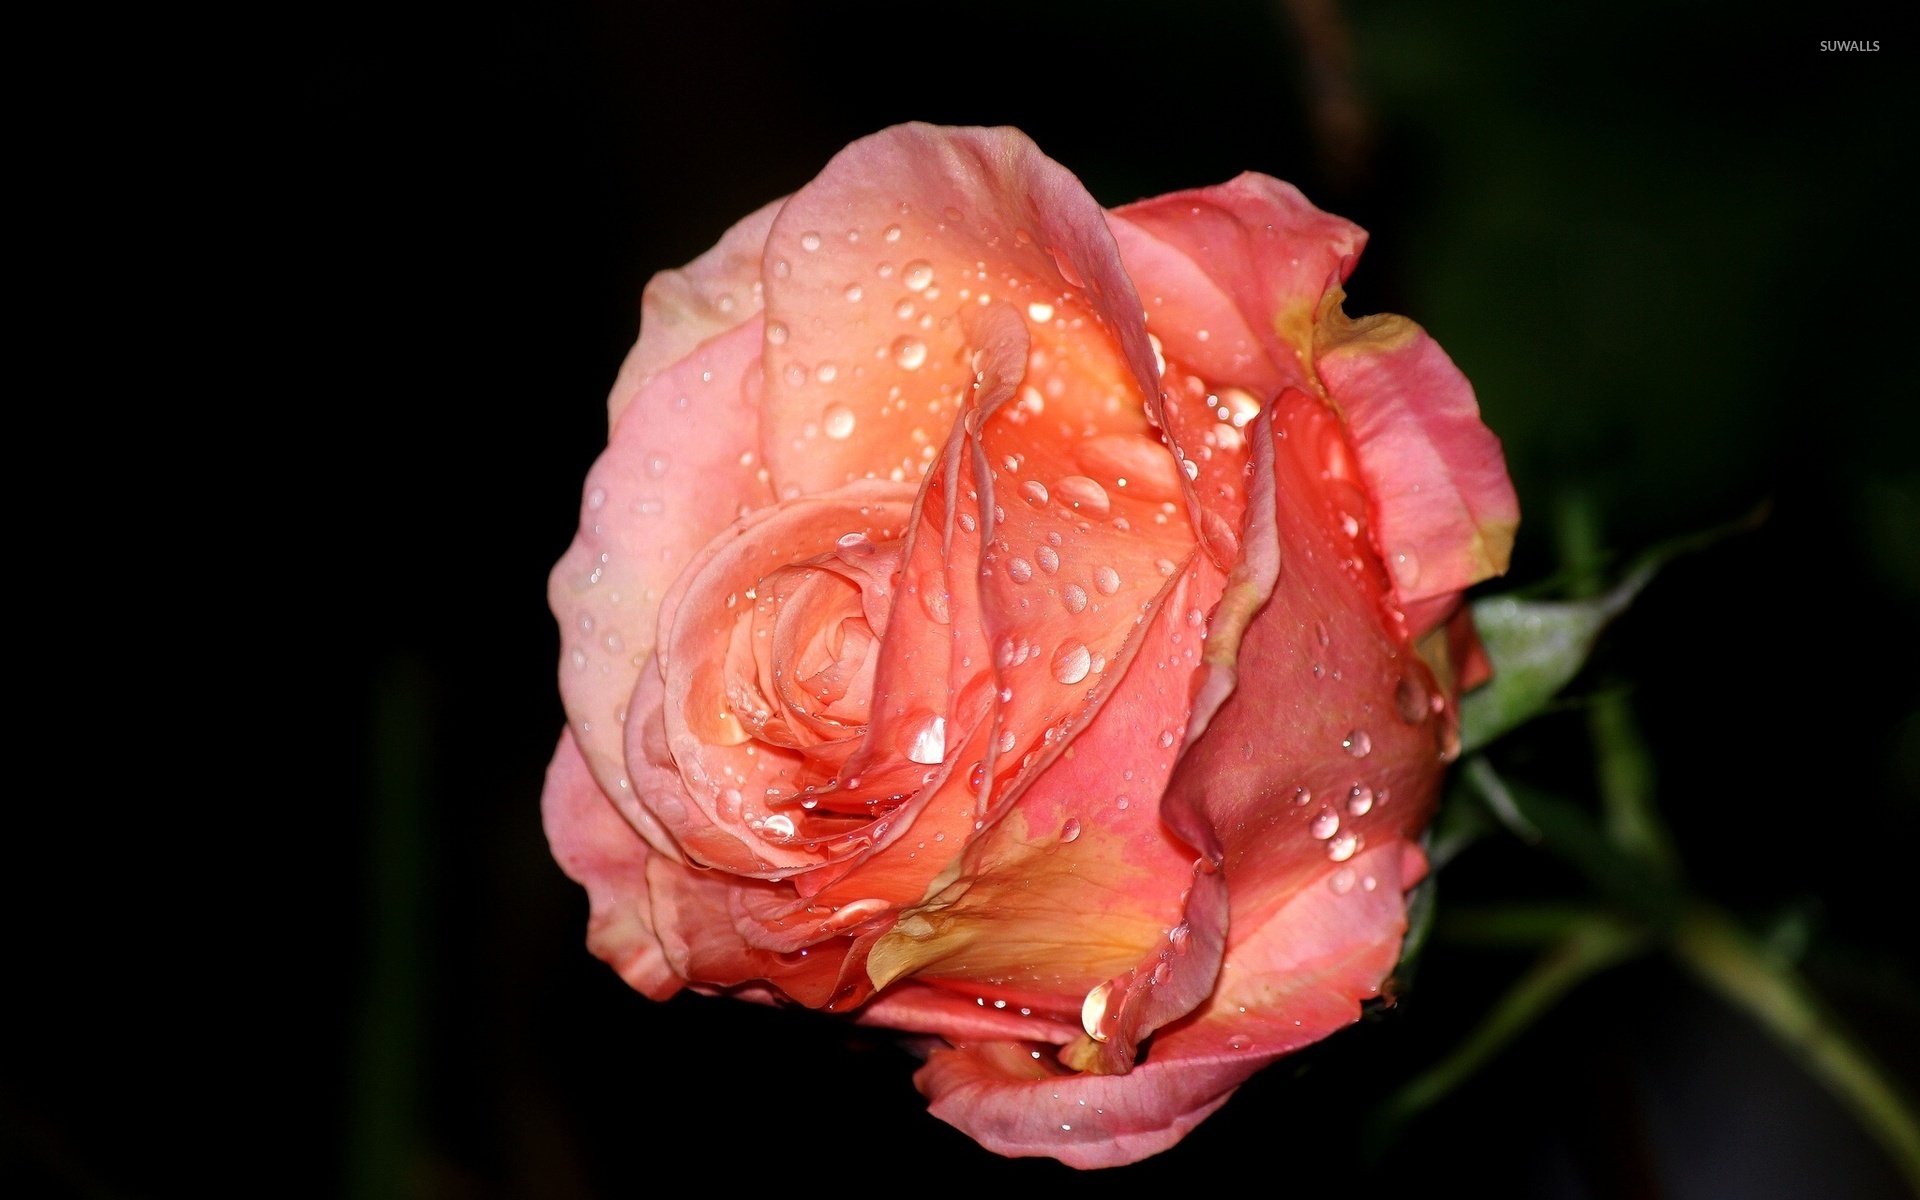 Rose with water drops wallpaper   Flower wallpapers   41795 1366x768